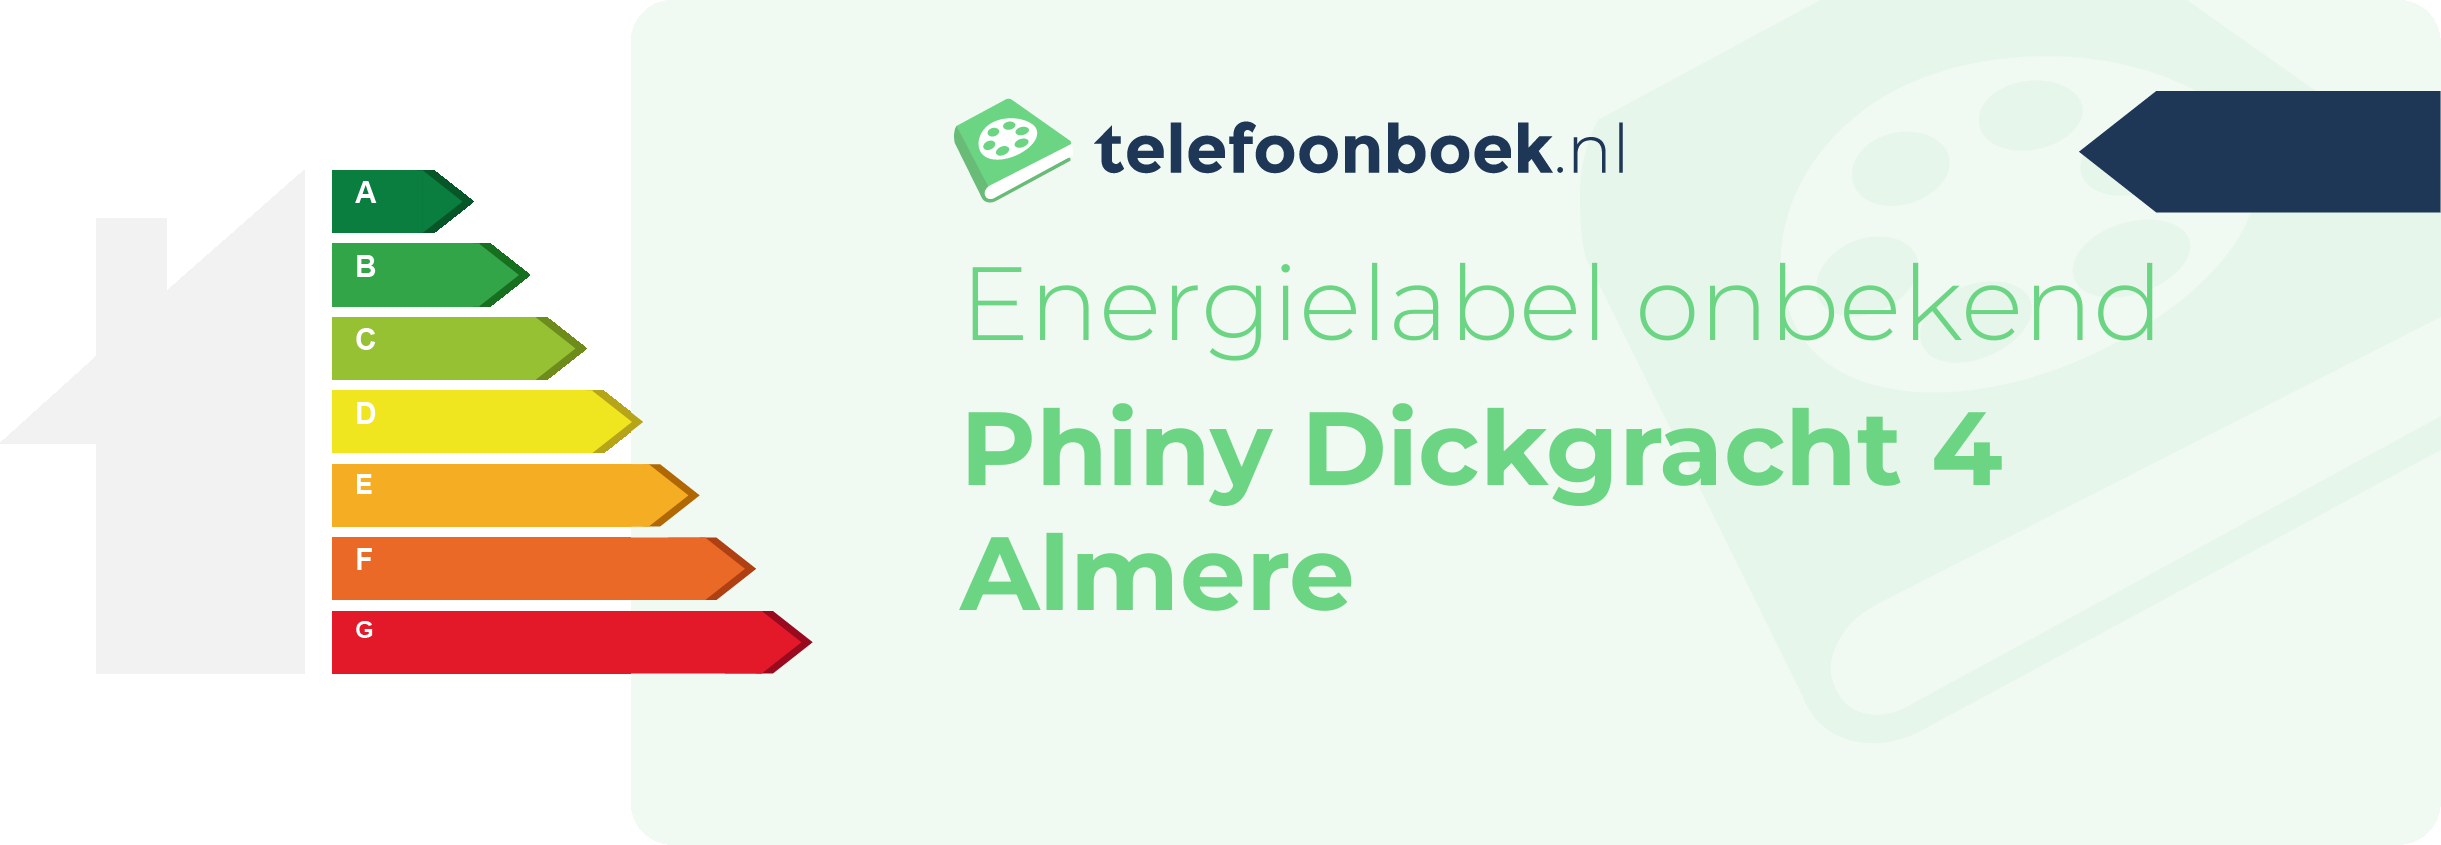 Energielabel Phiny Dickgracht 4 Almere